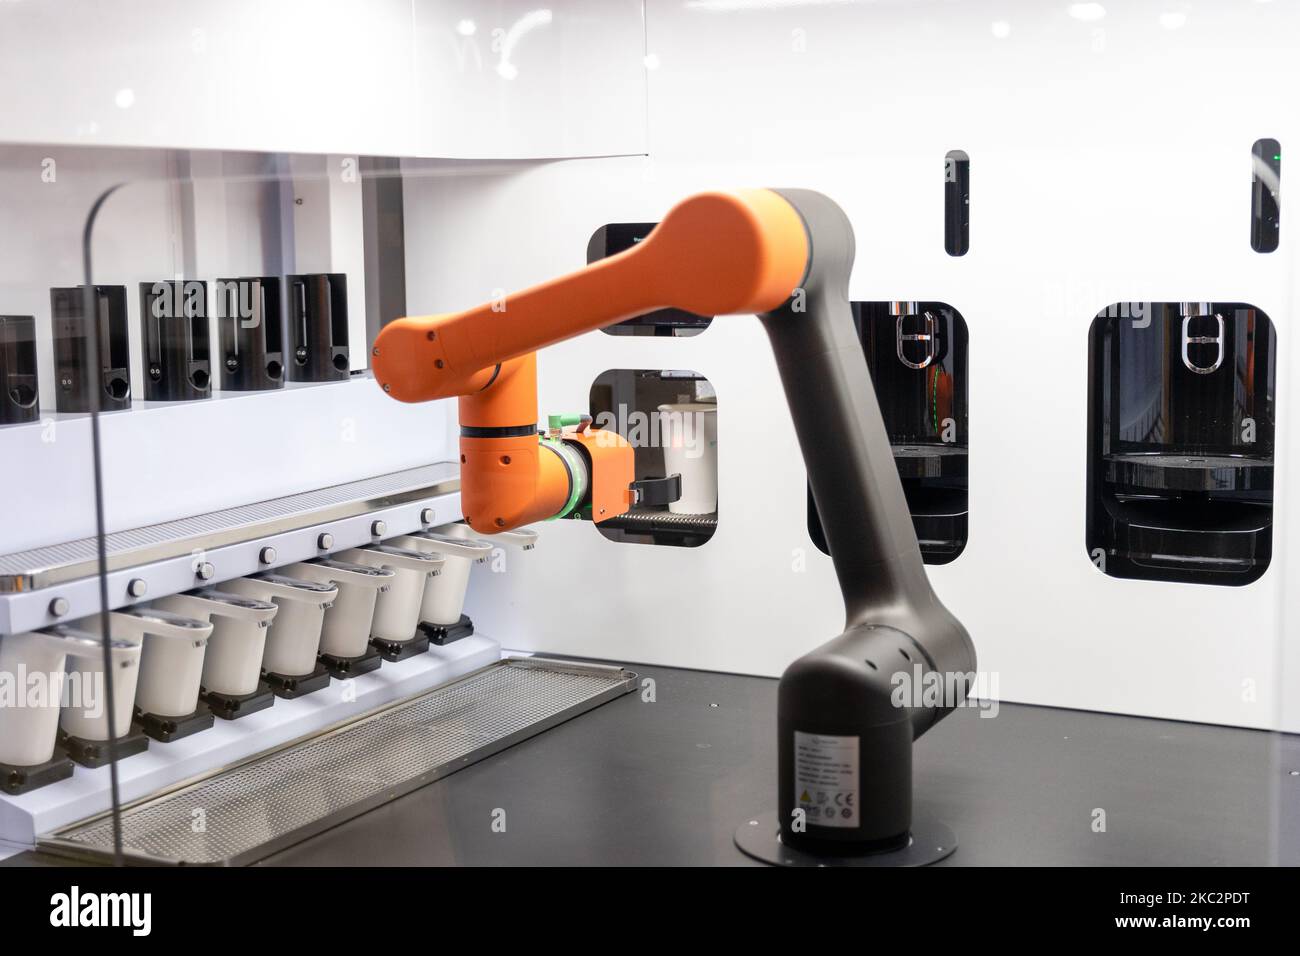 STORANT's artificial intelligence barista robot is demonstrating the process of making coffee during AI Expo Korea at Coex on October 27, 2020 in Seoul, South Korea. STORANT has developed and commercialized the world's finest smart barista system, in which robots manufacture coffee and transmit it to tables with customers. By December 2020, 15 stores will be opened in major cities nationwide. (Photo by Chris Jung/NurPhoto) Stock Photo